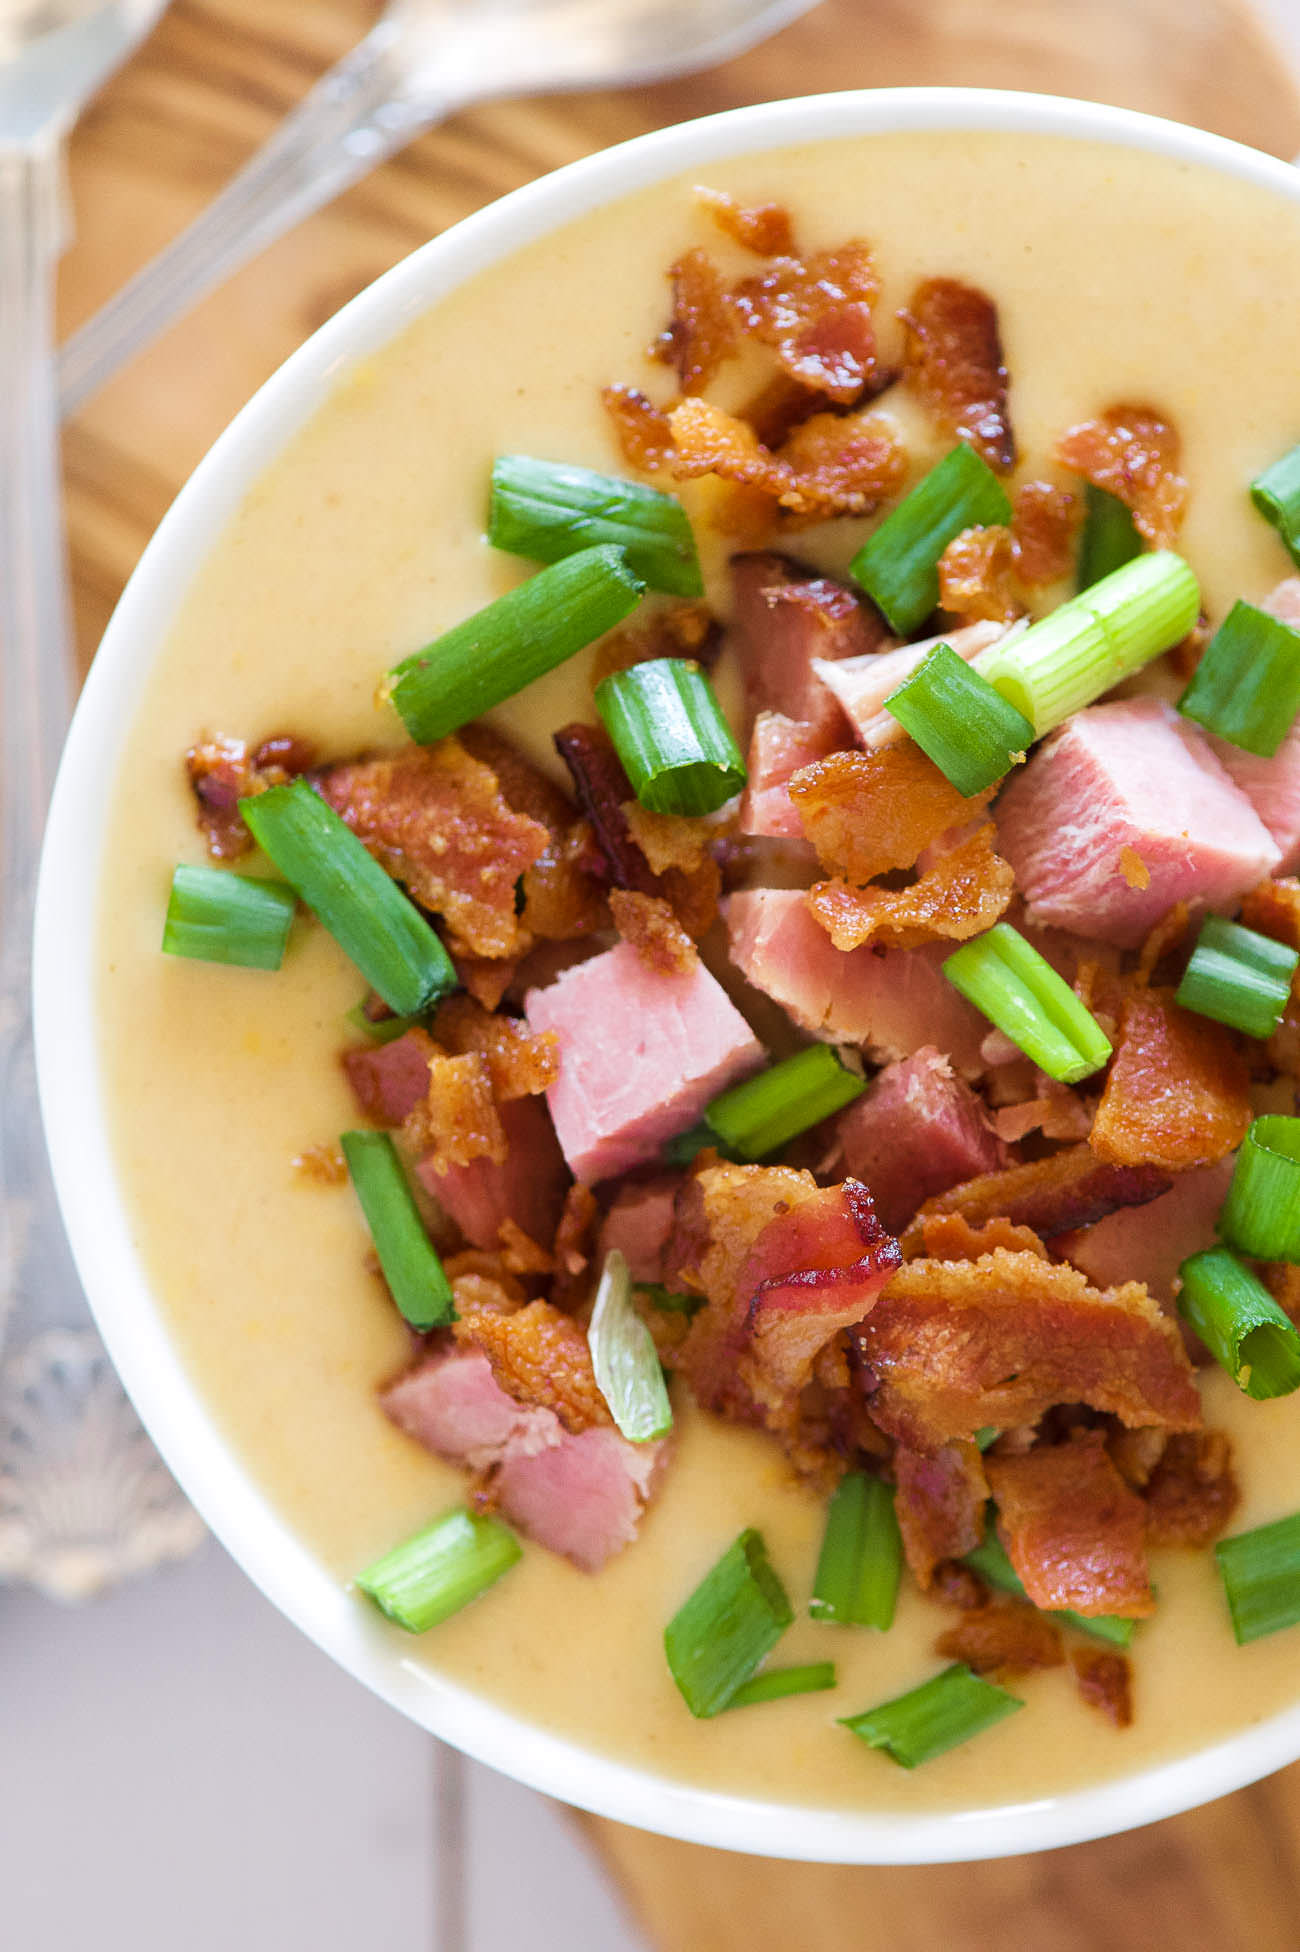 For those cheese and beer lovers - this Ham and White Cheddar Beer Cheese Soup is delicious creamy and full of flavor thanks to two types of cheese, beer, ham and bacon!